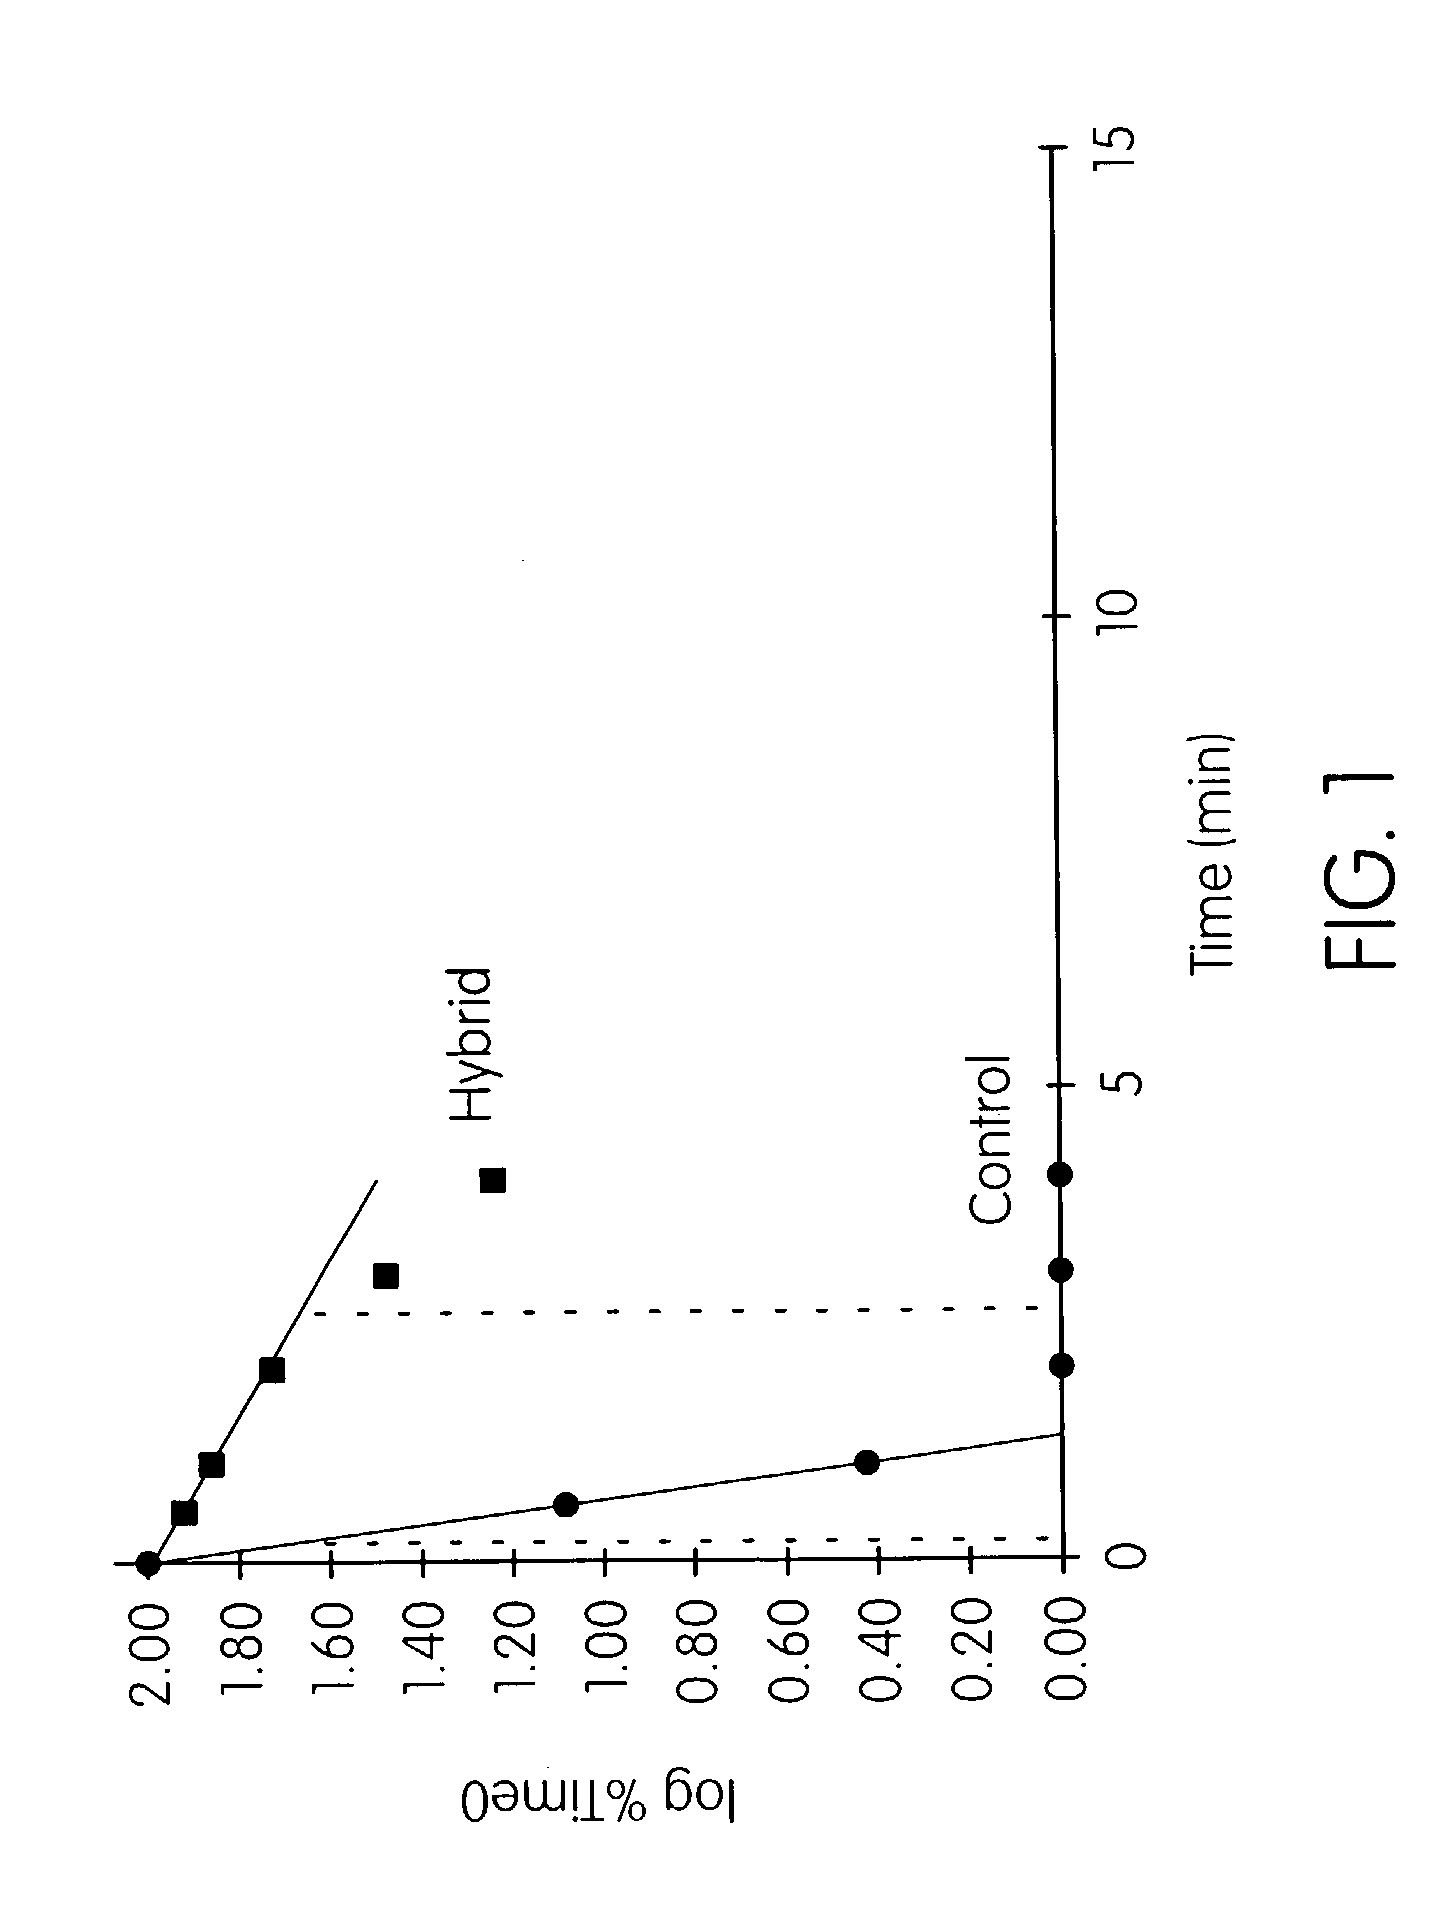 Probes, compositions and kits for determining the presence of Mycoplasma genitalium in a test sample